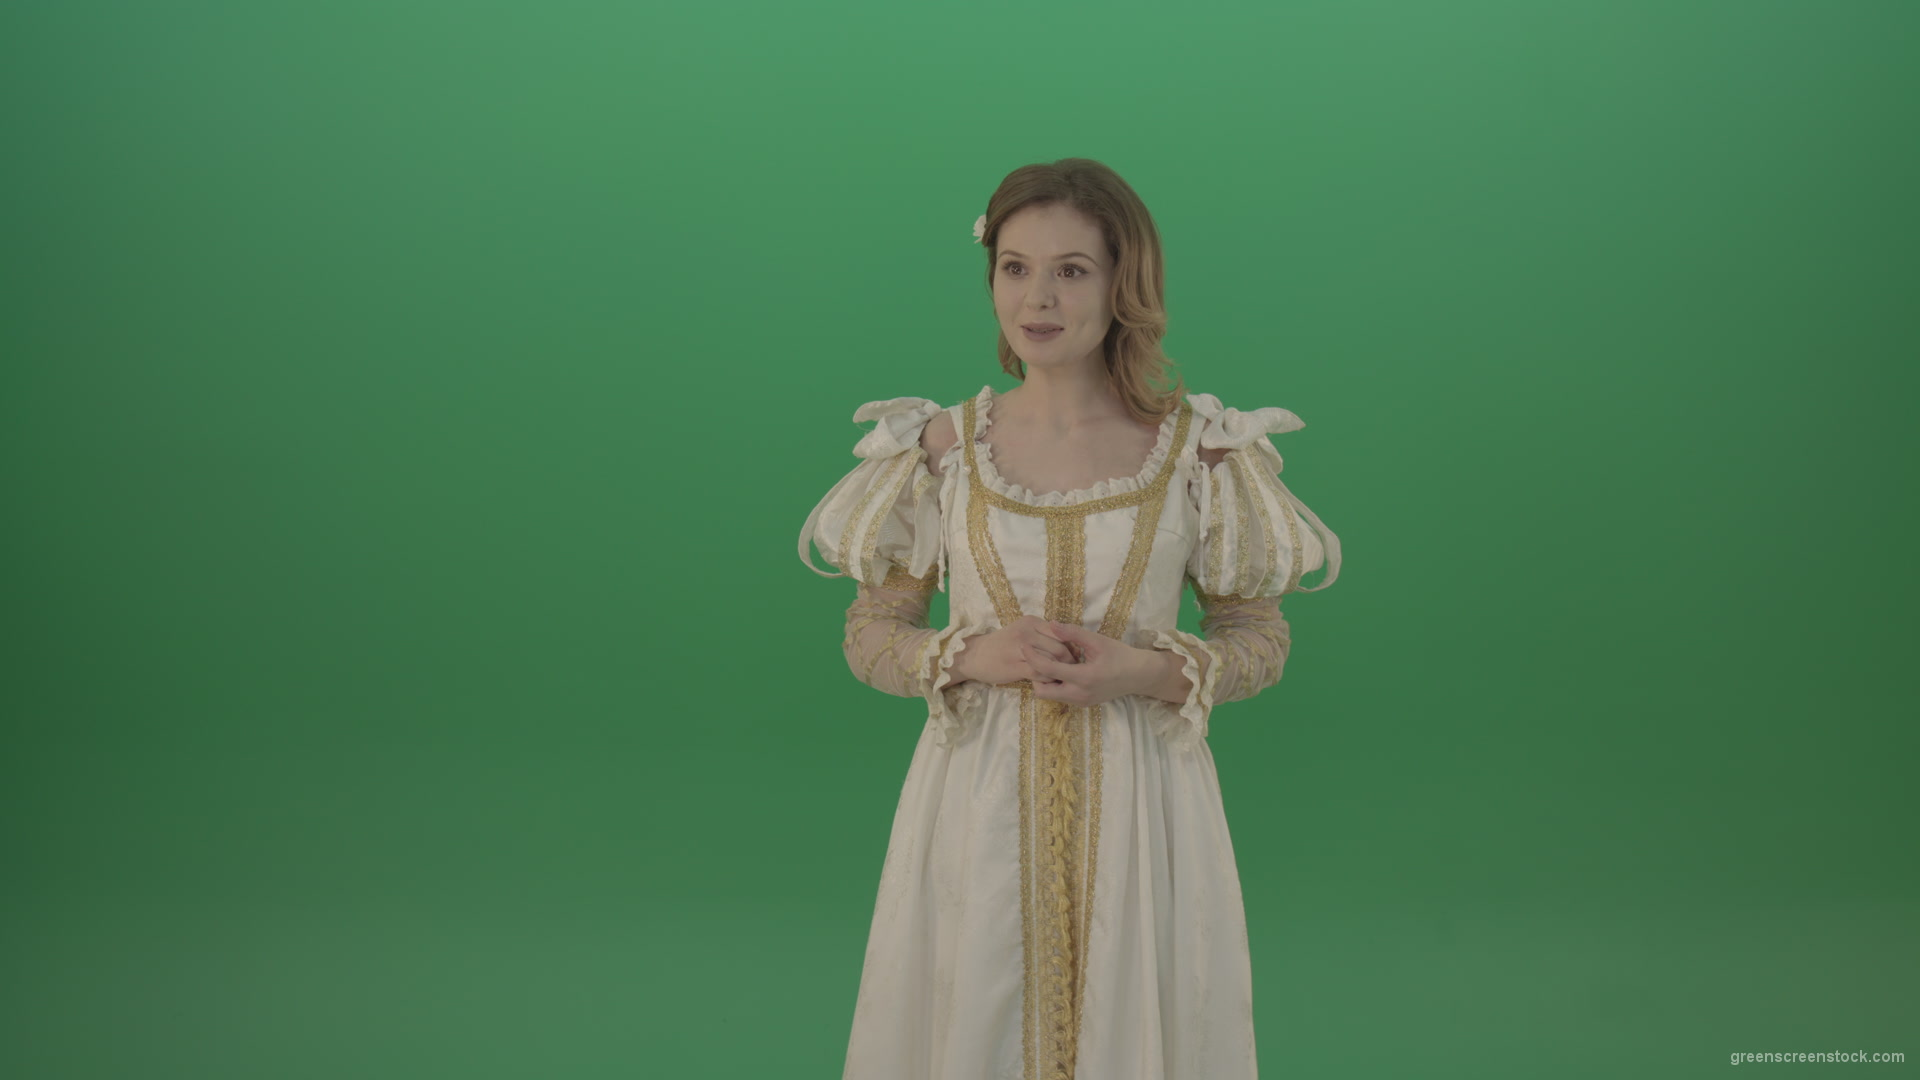 Medieval-girl-in-a-white-suit-looking-far-away-isolated-on-green-background_009 Green Screen Stock